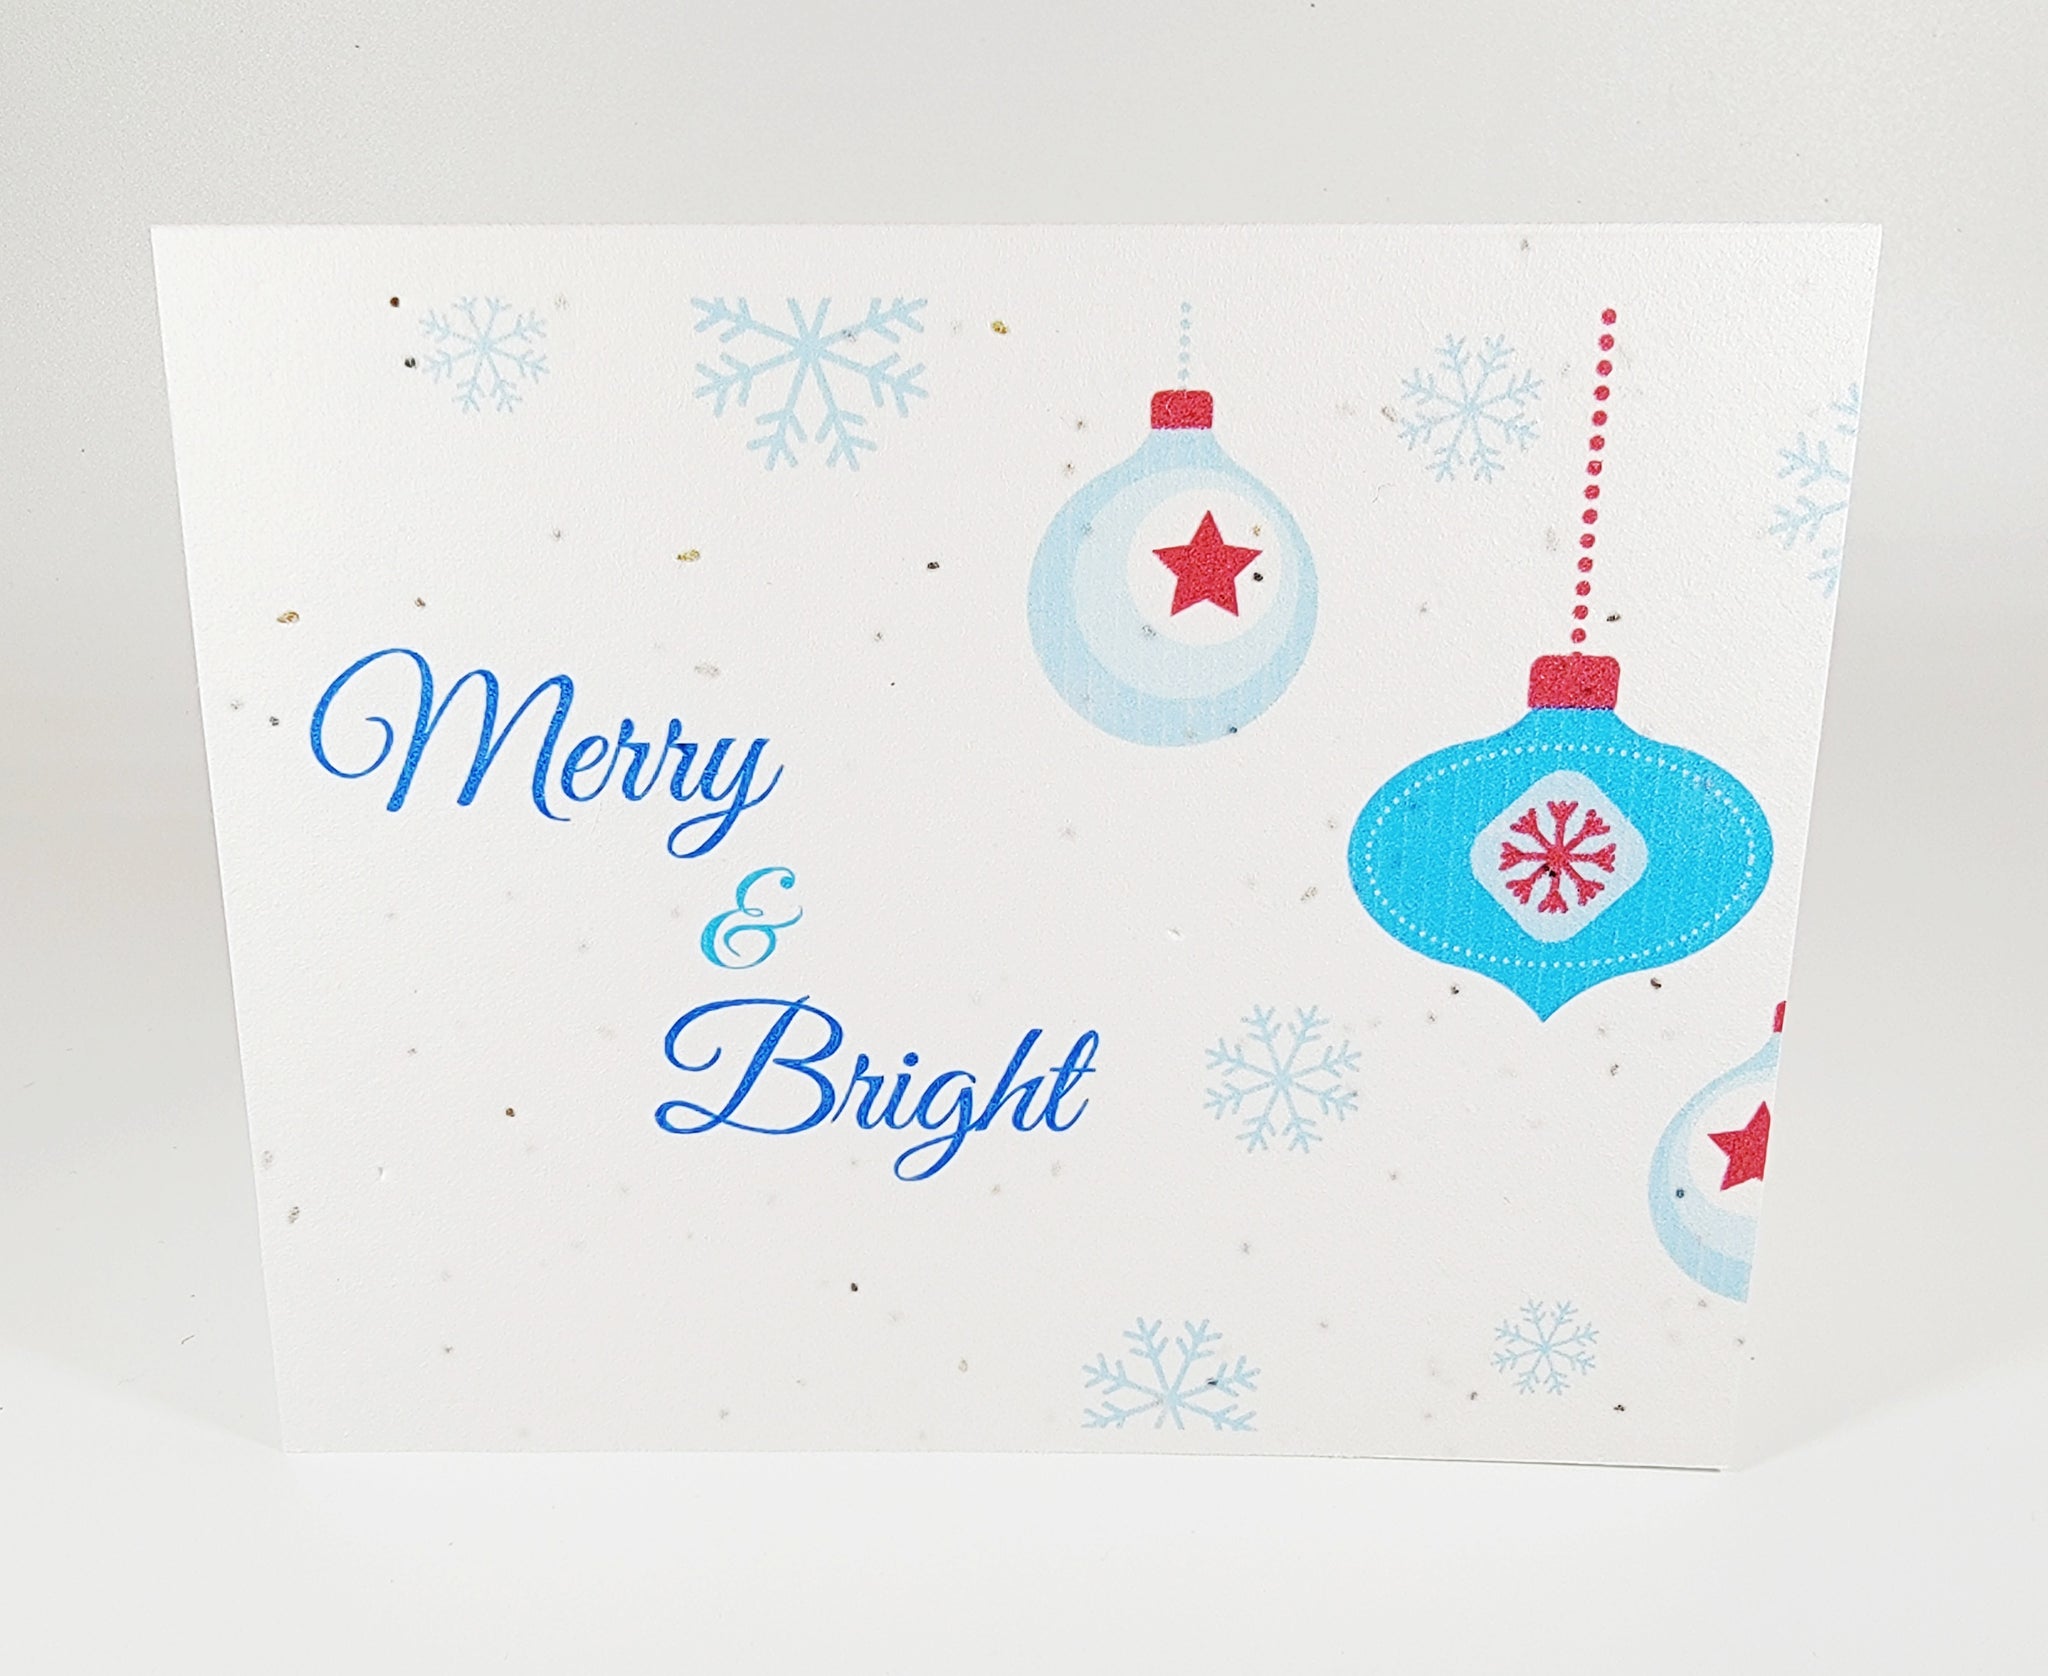 Plantable seed paper card Merry & Bright with blue ornaments and snowflakes